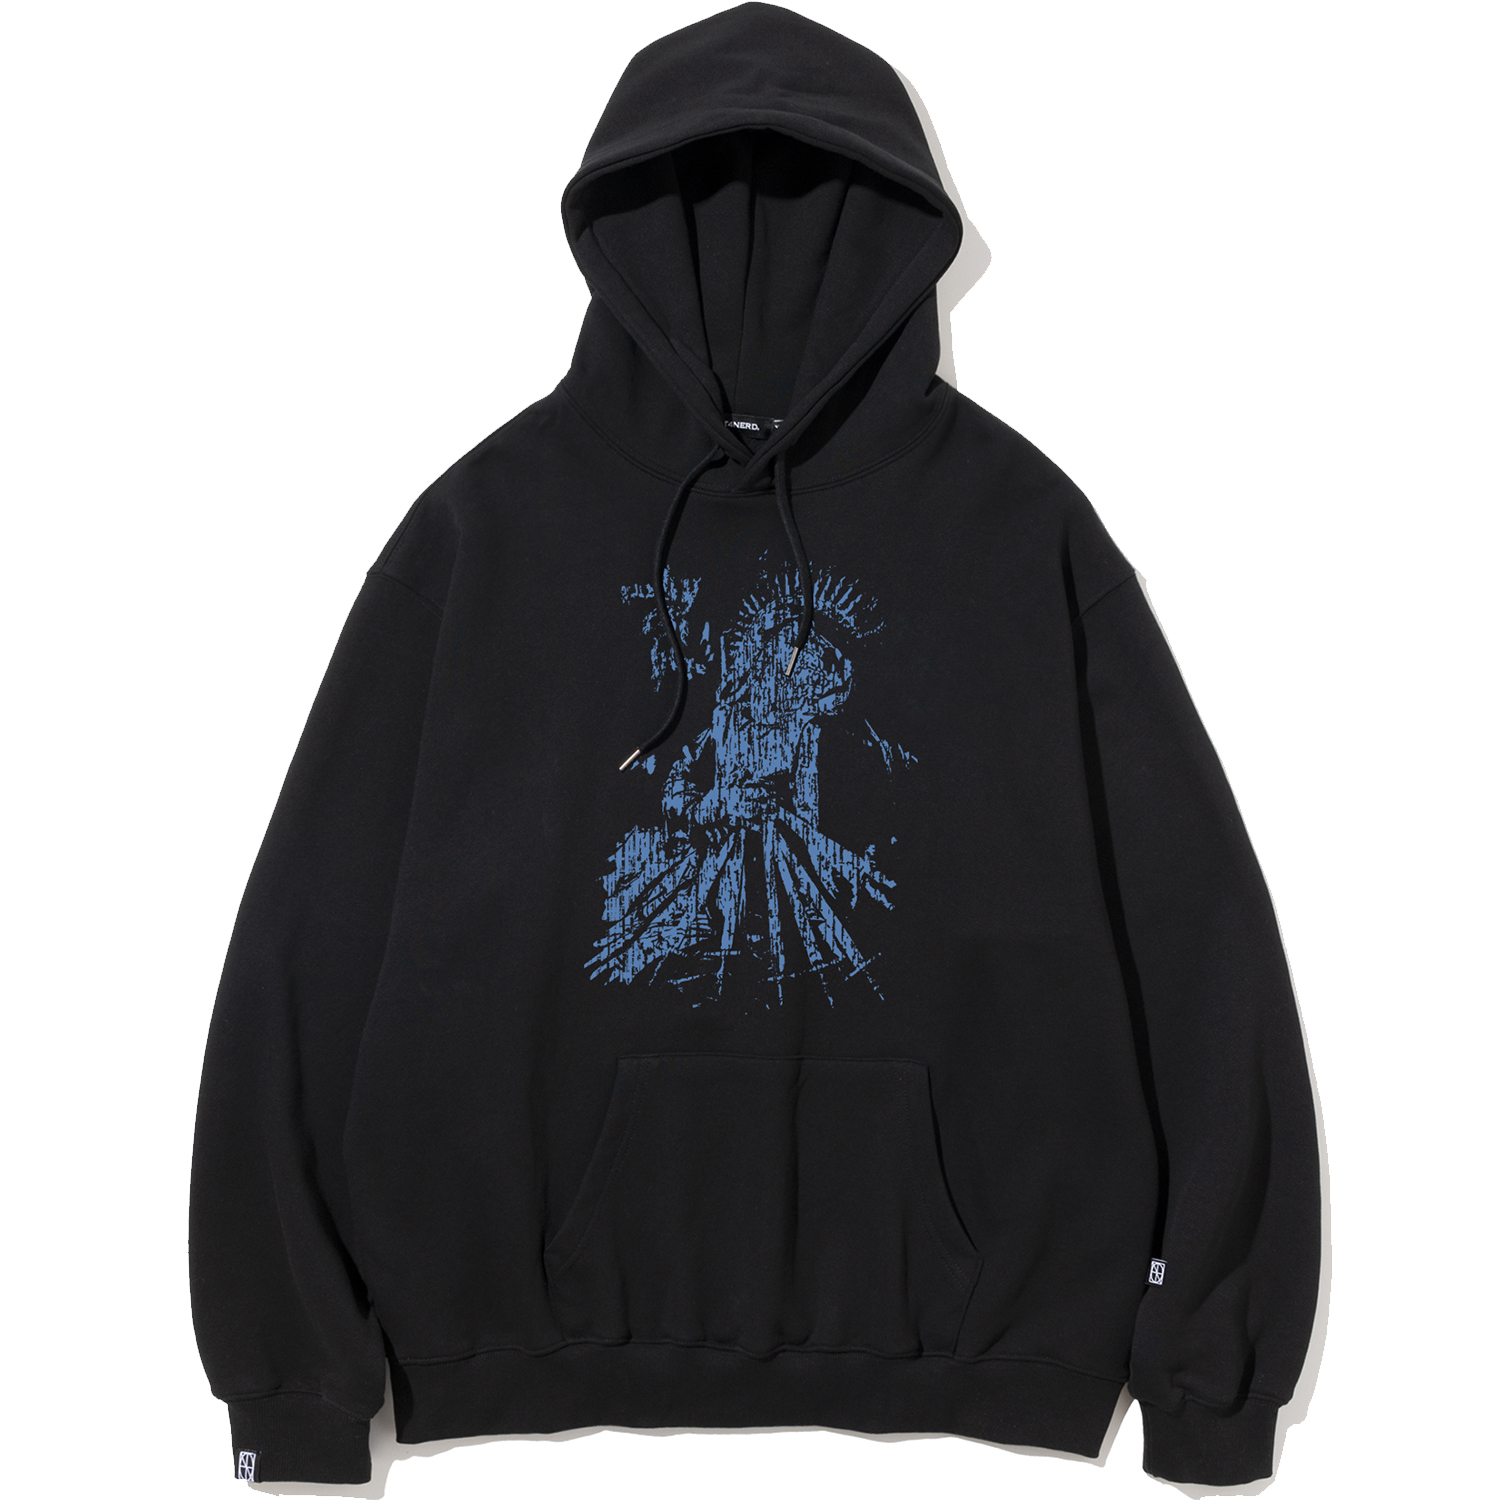 Why The Hate Pullover Hood - Black,NOT4NERD